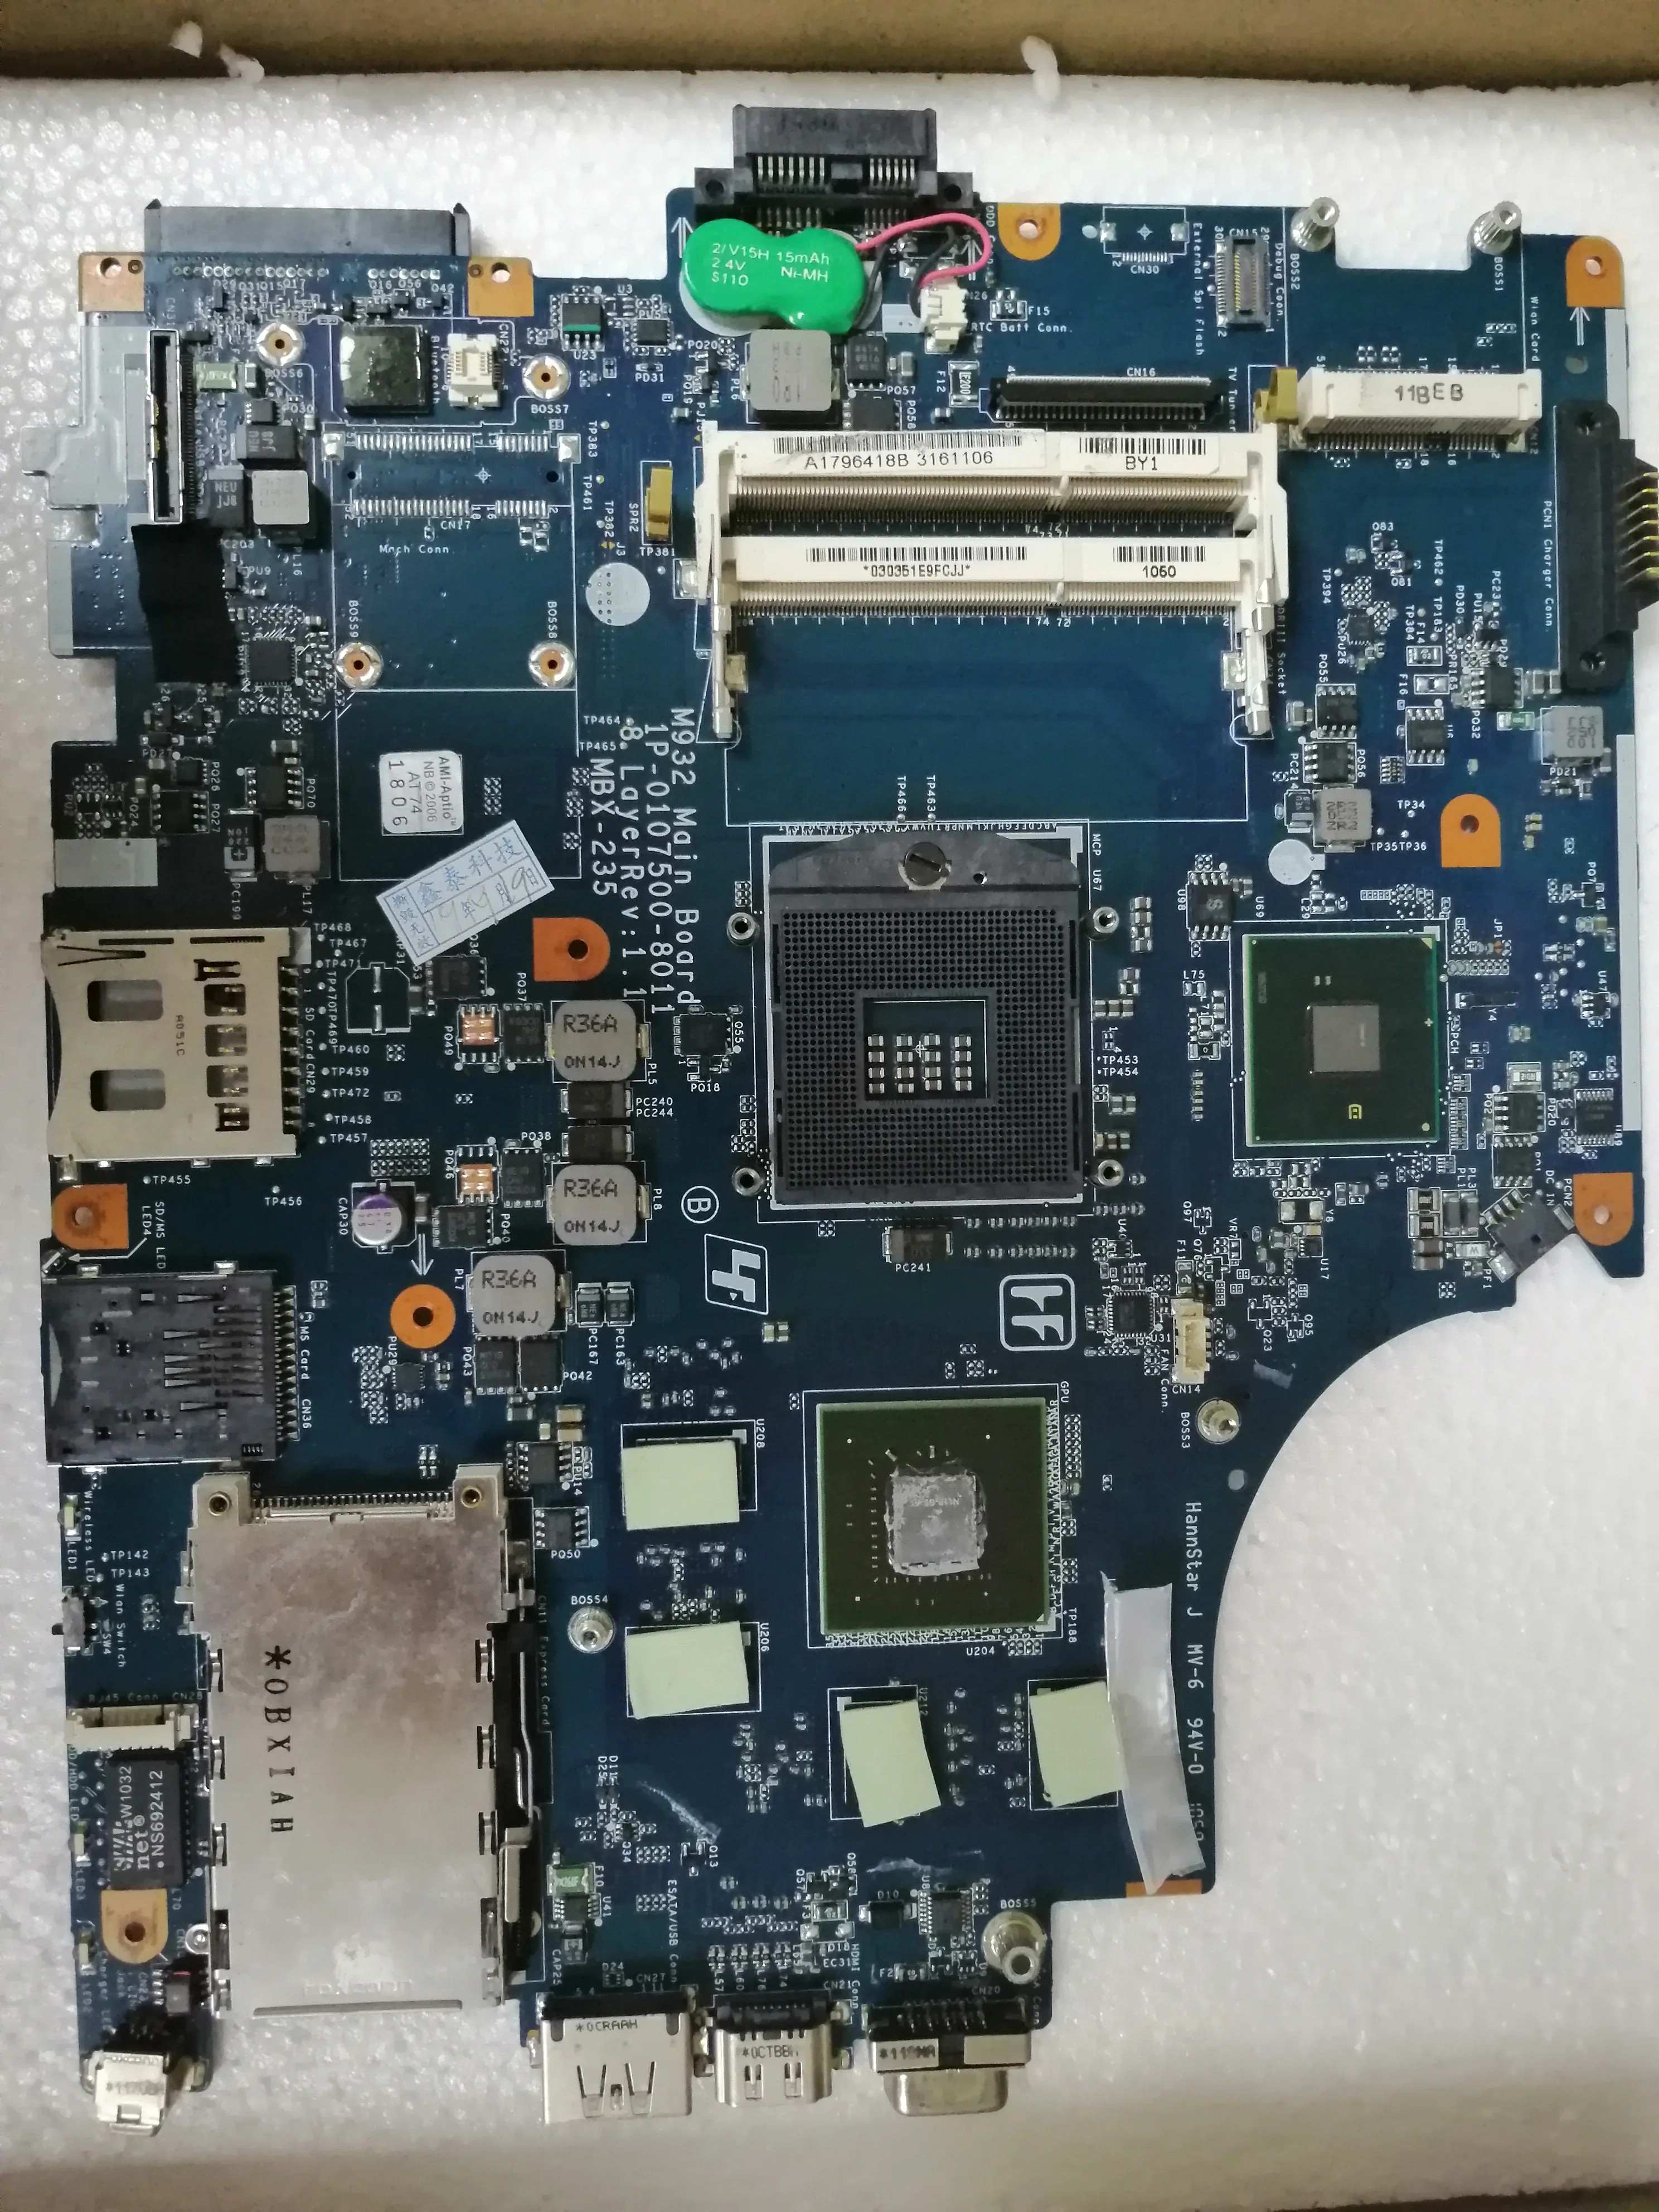 

MBX-235 connect board tested by system price differences